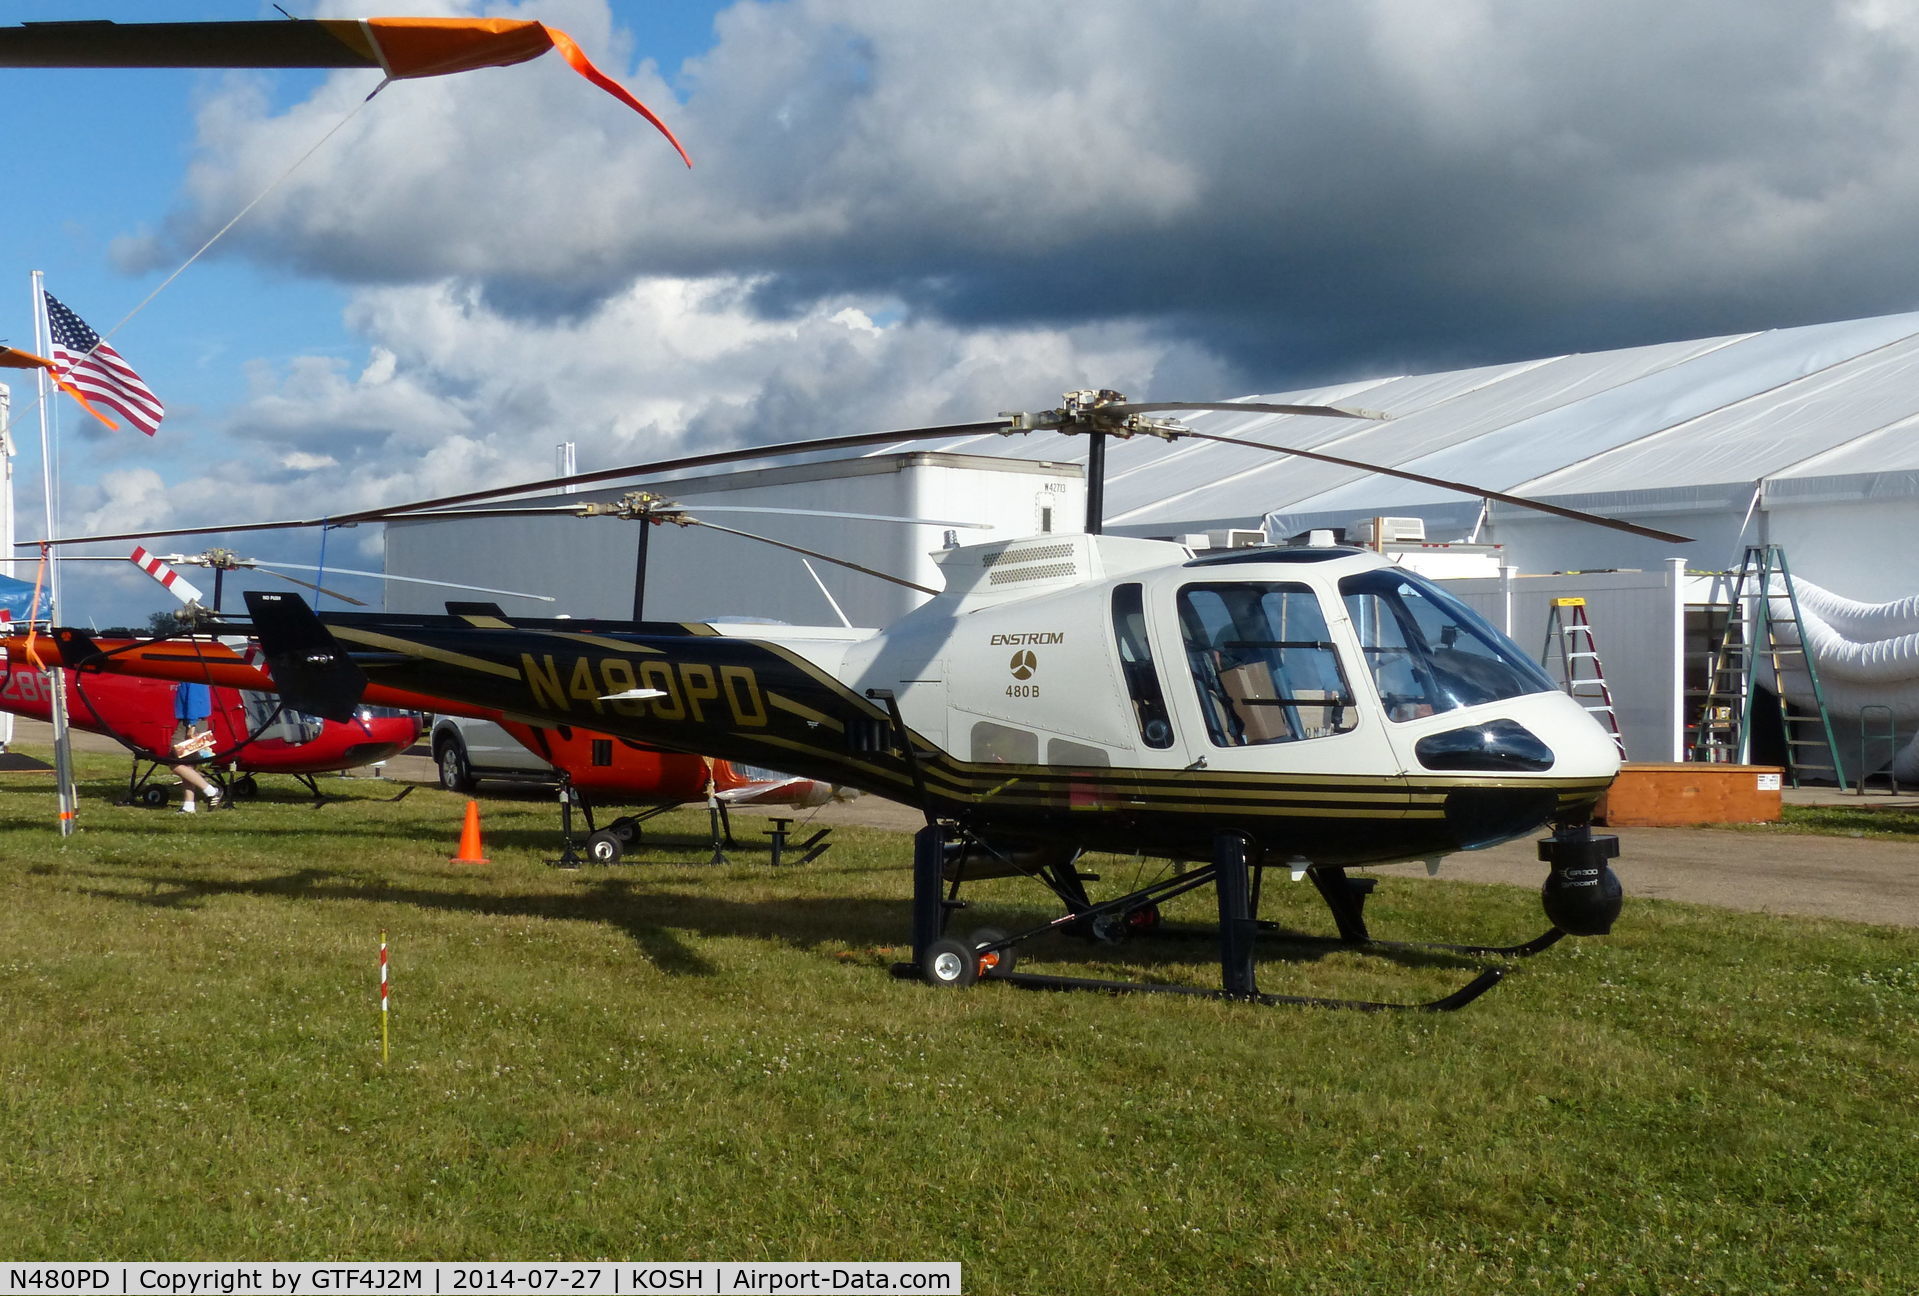 N480PD, 2013 Enstrom 480B C/N 5157, N480PD   at Oskosh 27.7.14, at least the 3rd Enstrom 480B in these marks